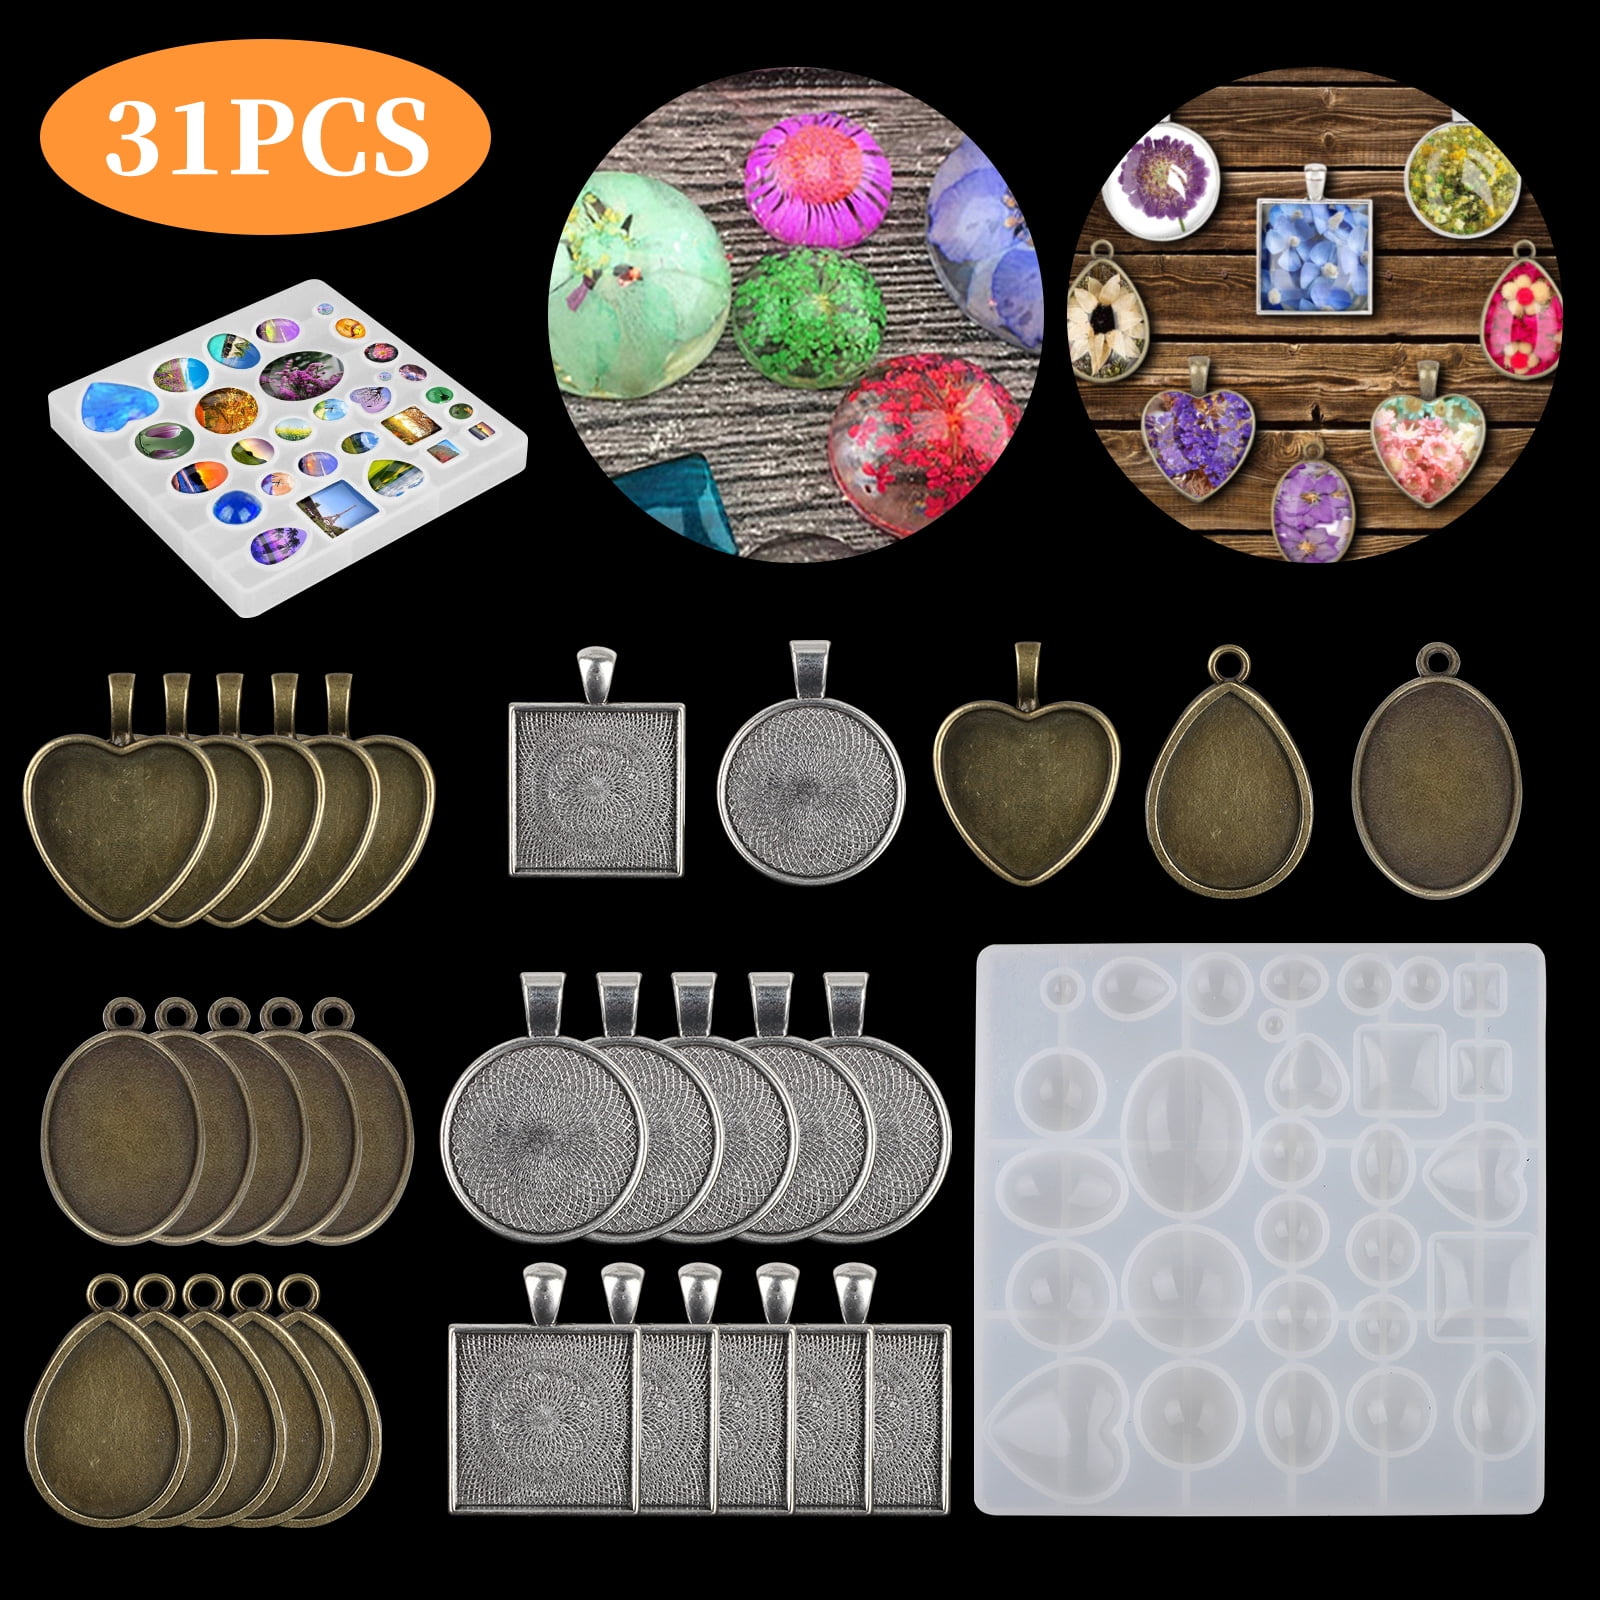 18pcs DIY Silicone Resin Casting Molds Tools Set, EEEkit Epoxy Resin Molds for Jewelry Craft Casting, Including Cube, Pyramid, Sphere, Diamond, Stone